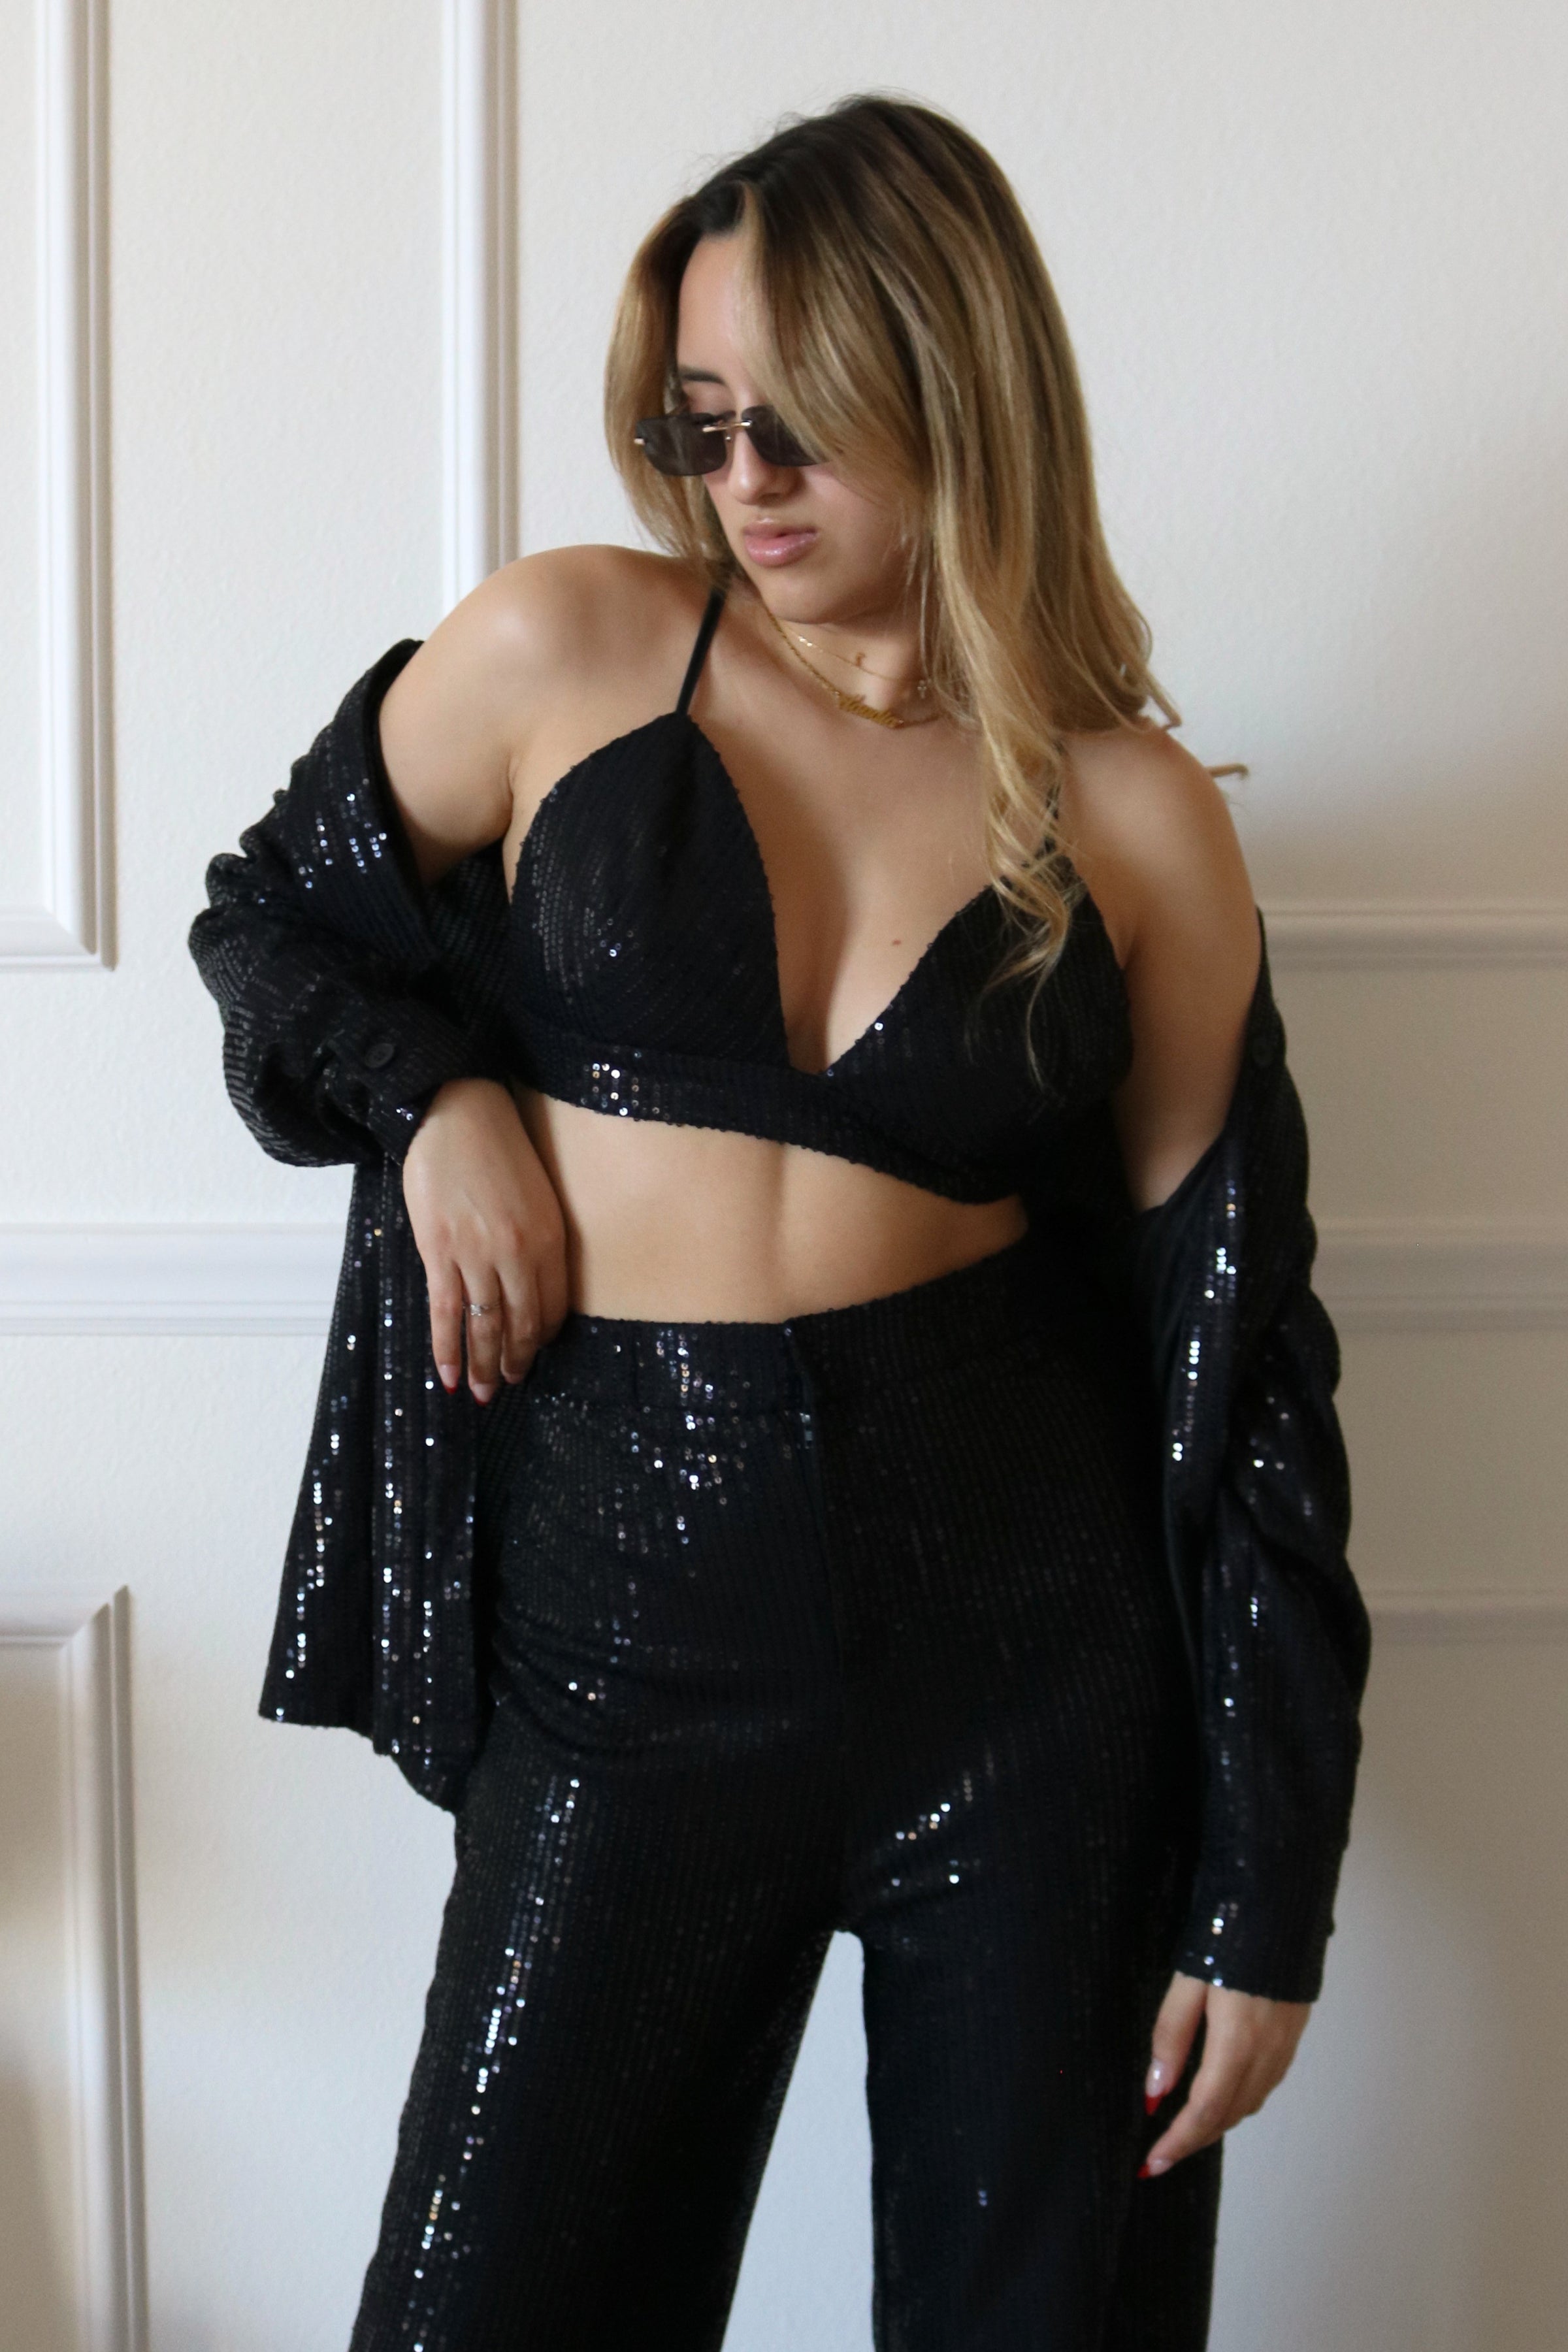 THE NEW YEAR SEQUIN BRALETTE – THE STYLE UNION